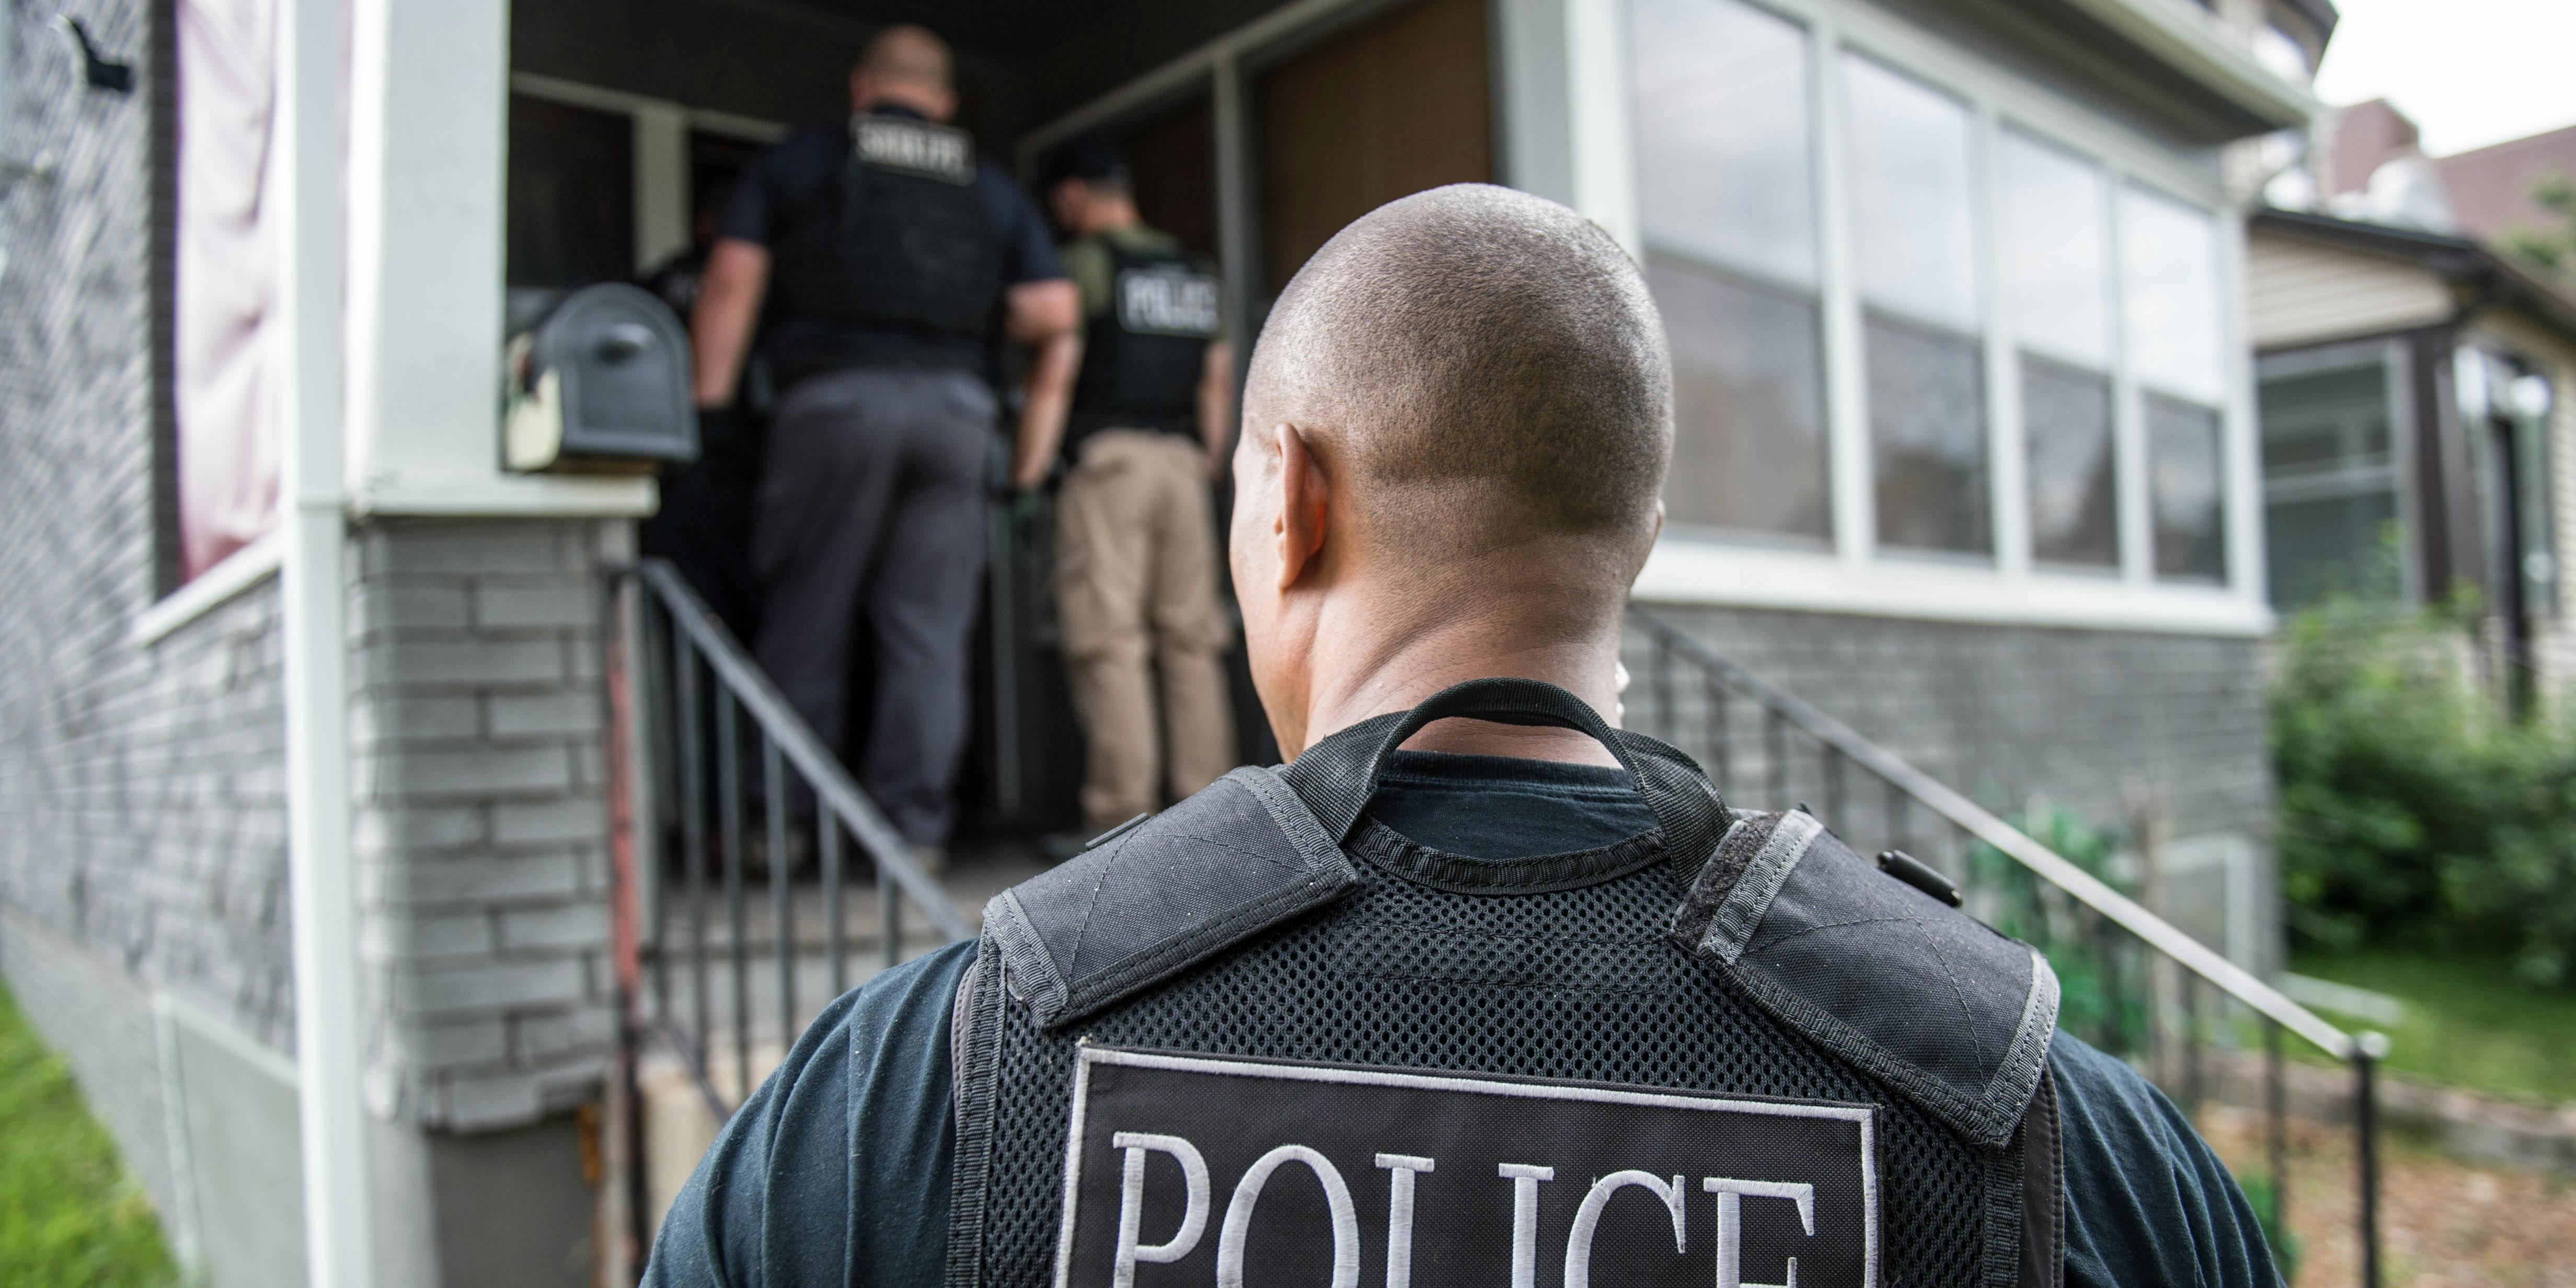 Denver police recently raided illegal grows in Canada. Here, The US Marshals Service, Omaha Police Department and numerous other state and local agencies are shown in an operation to crack down on gang members